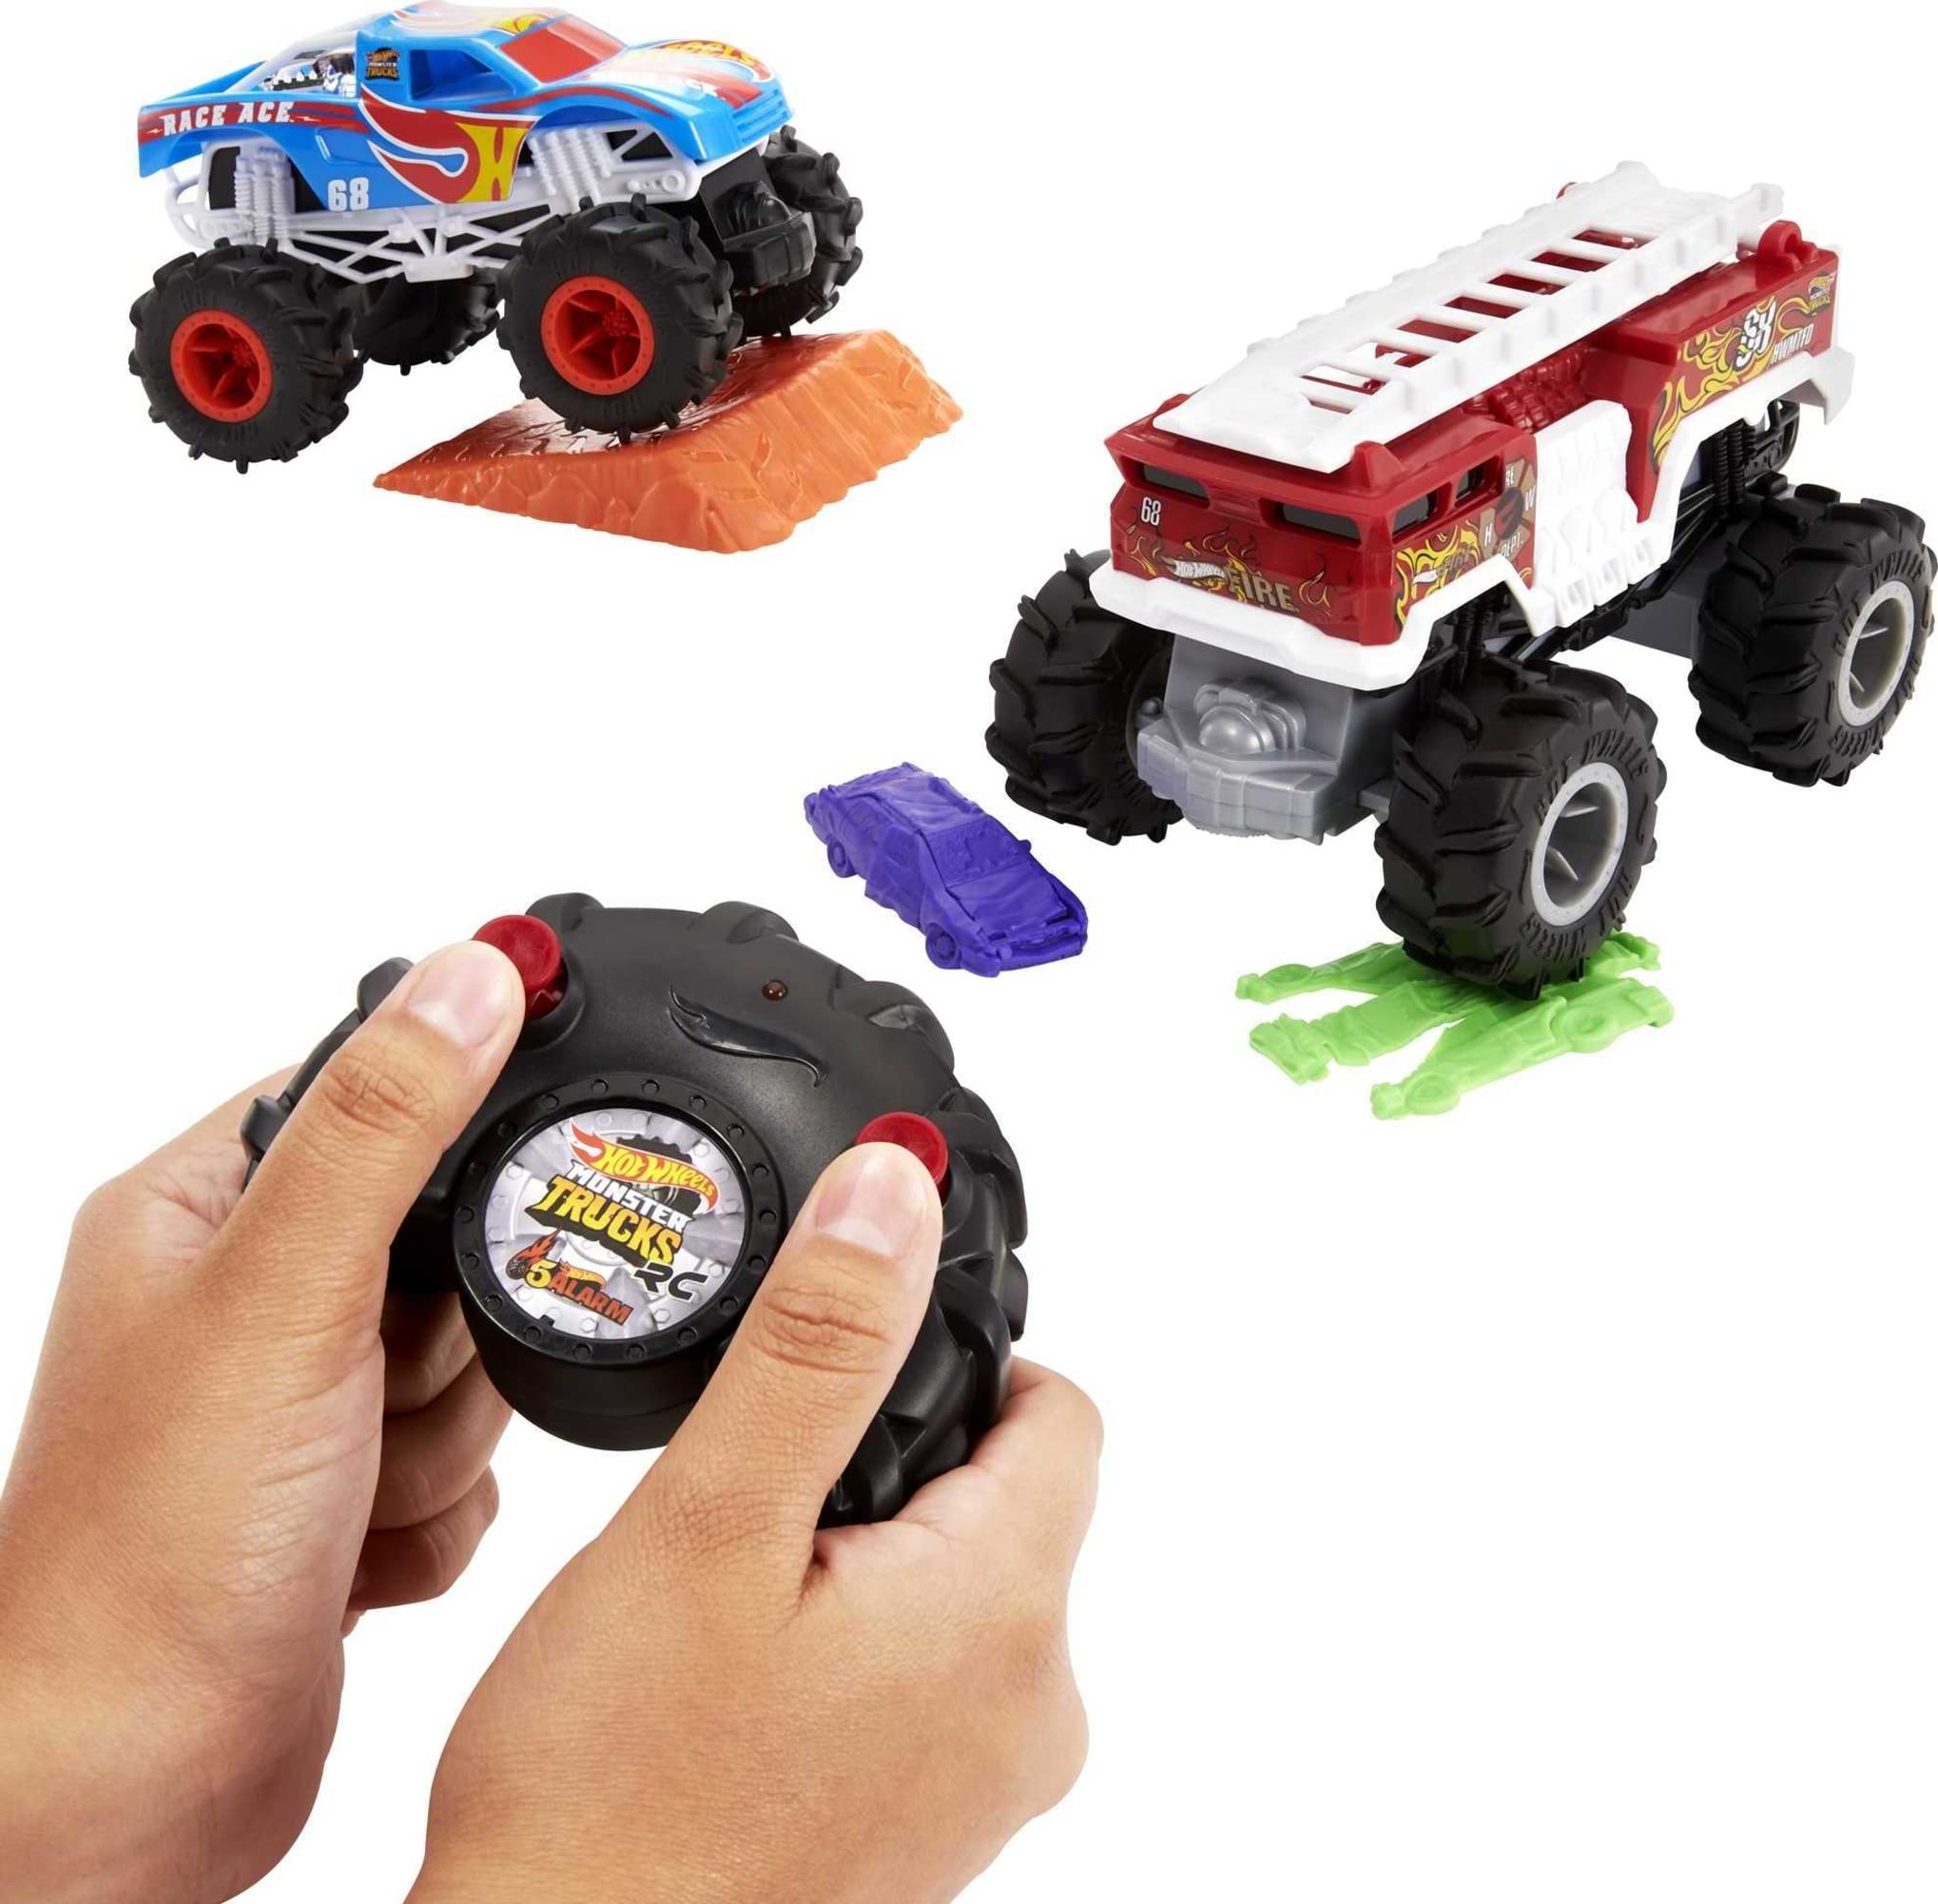 2-Pack Hot Wheels Radio Controlled 1:24 Scale Monster Trucks $13.56 + Free Shipping w/ Prime or on $35+